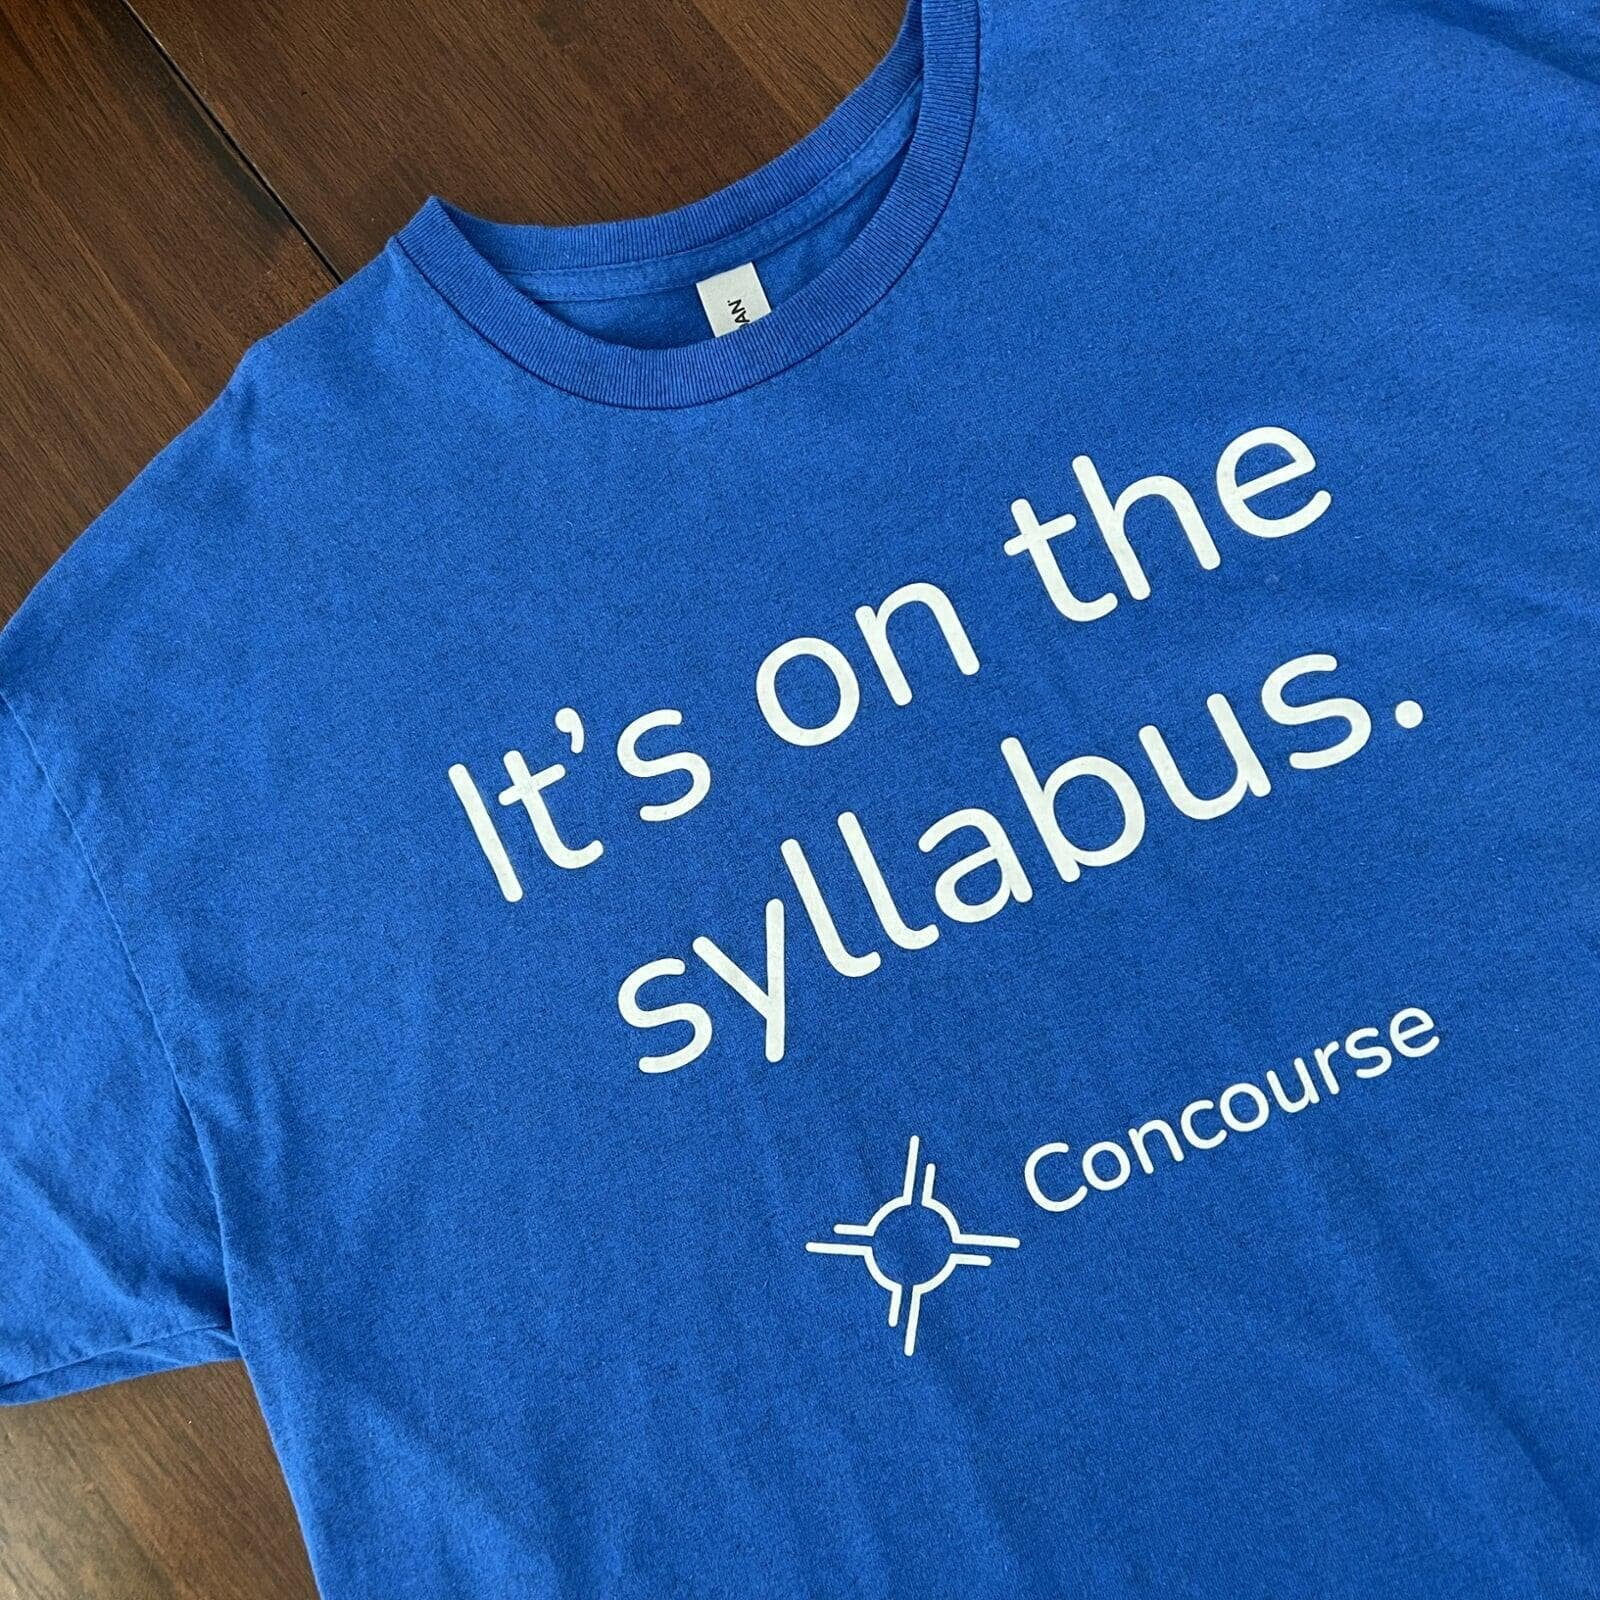 Blue t-shirt that says &quot;it's on the syllabus&quot; with the Concourse logo